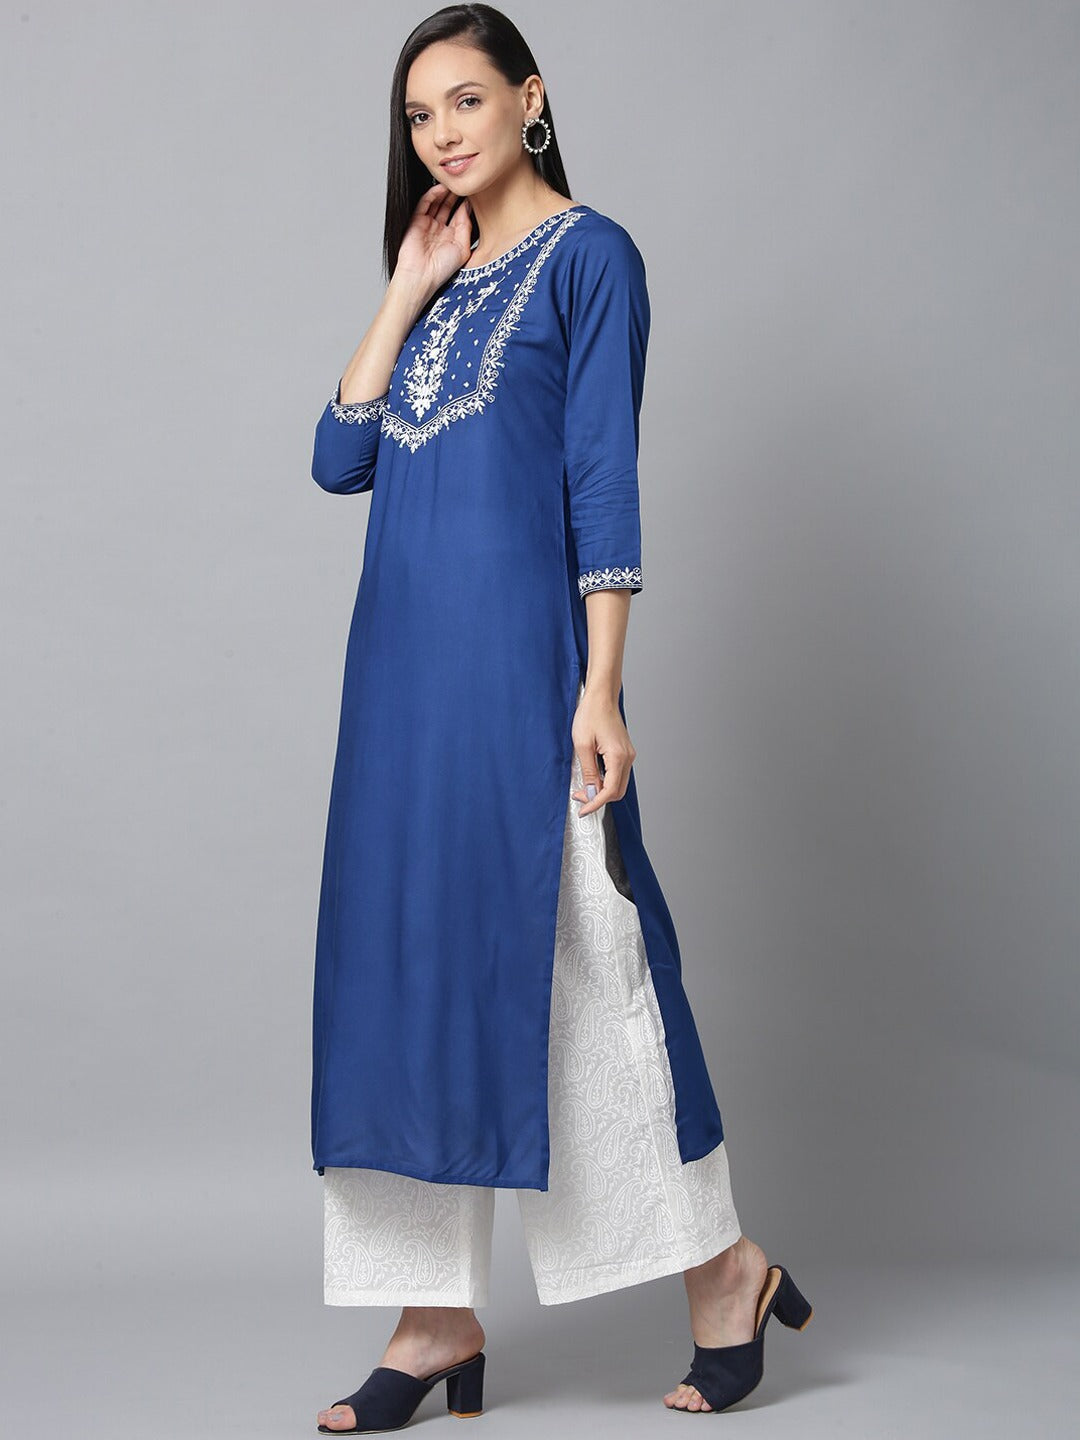 Kurta Palazzo in Blue  & White Yoke - Indian Clothing in Denver, CO, Aurora, CO, Boulder, CO, Fort Collins, CO, Colorado Springs, CO, Parker, CO, Highlands Ranch, CO, Cherry Creek, CO, Centennial, CO, and Longmont, CO. Nationwide shipping USA - India Fashion X